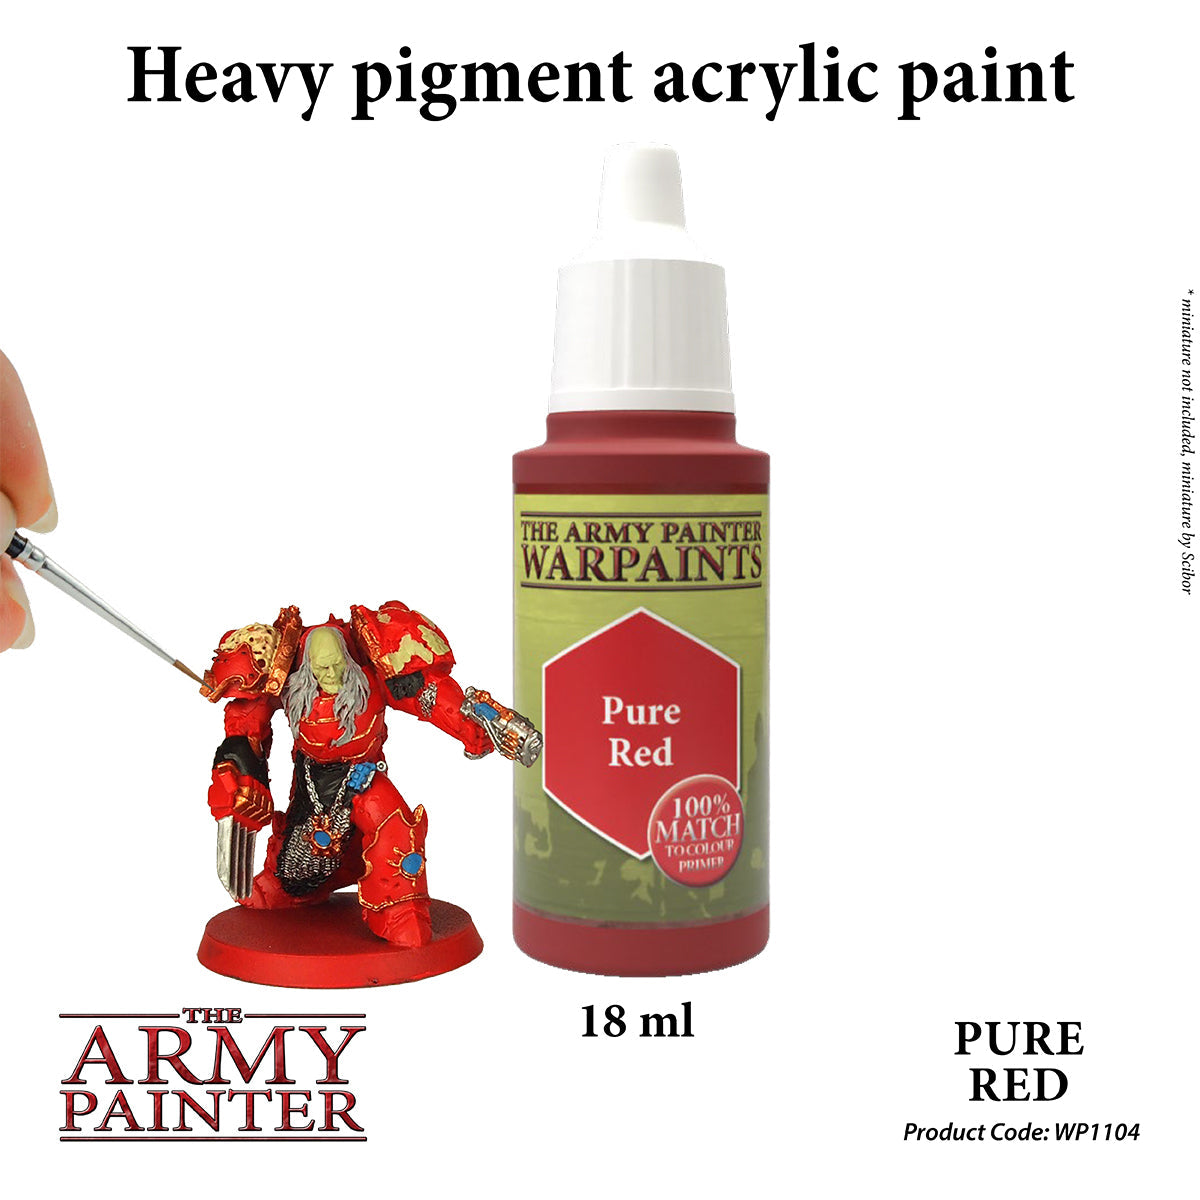 ARMY PAINTER Acrylic WARPAINT Complete Range Gloss/Flat/Washes